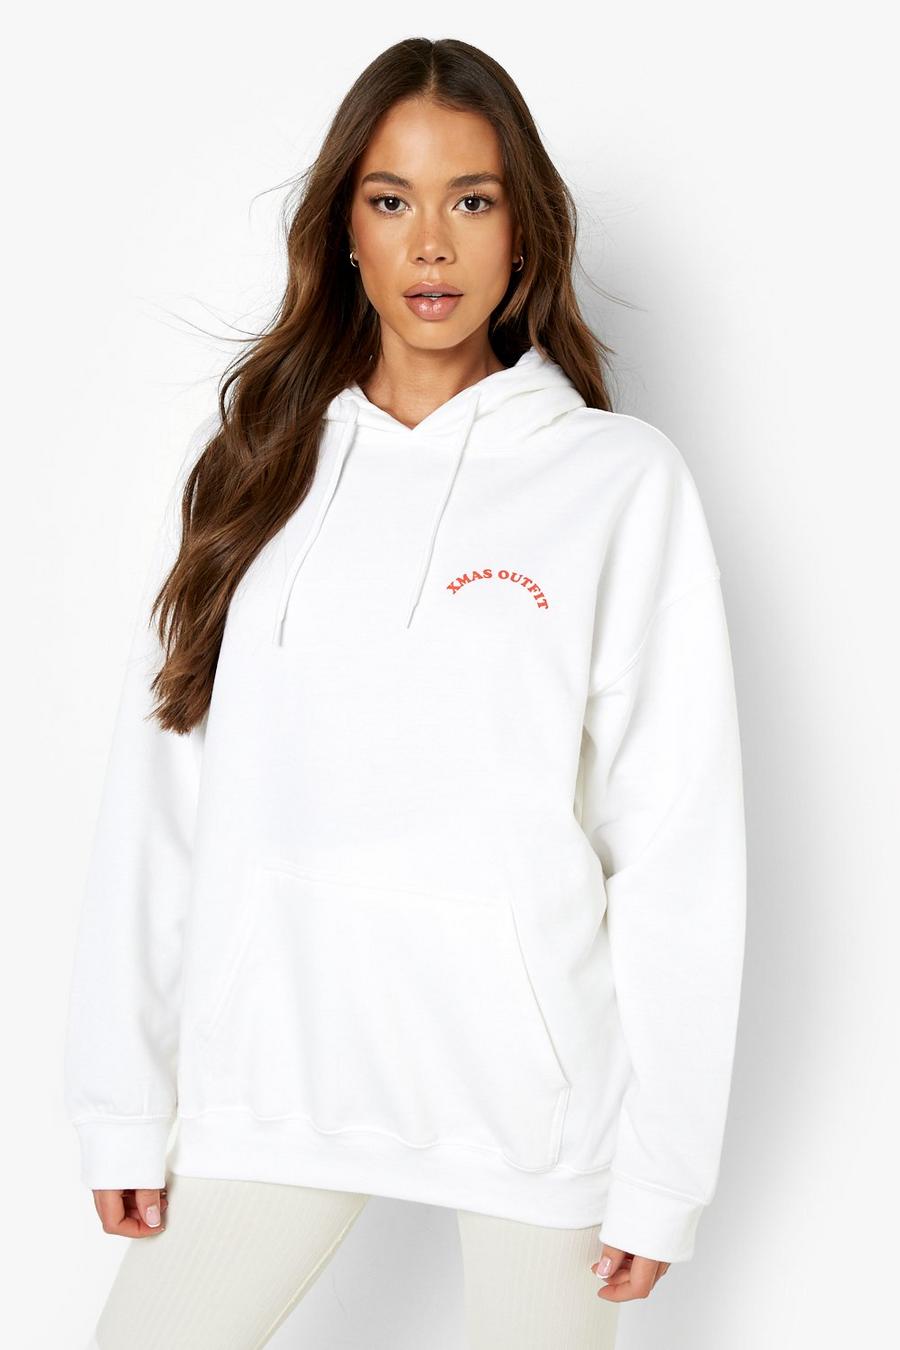 White Xmas Outfit Oversize hoodie